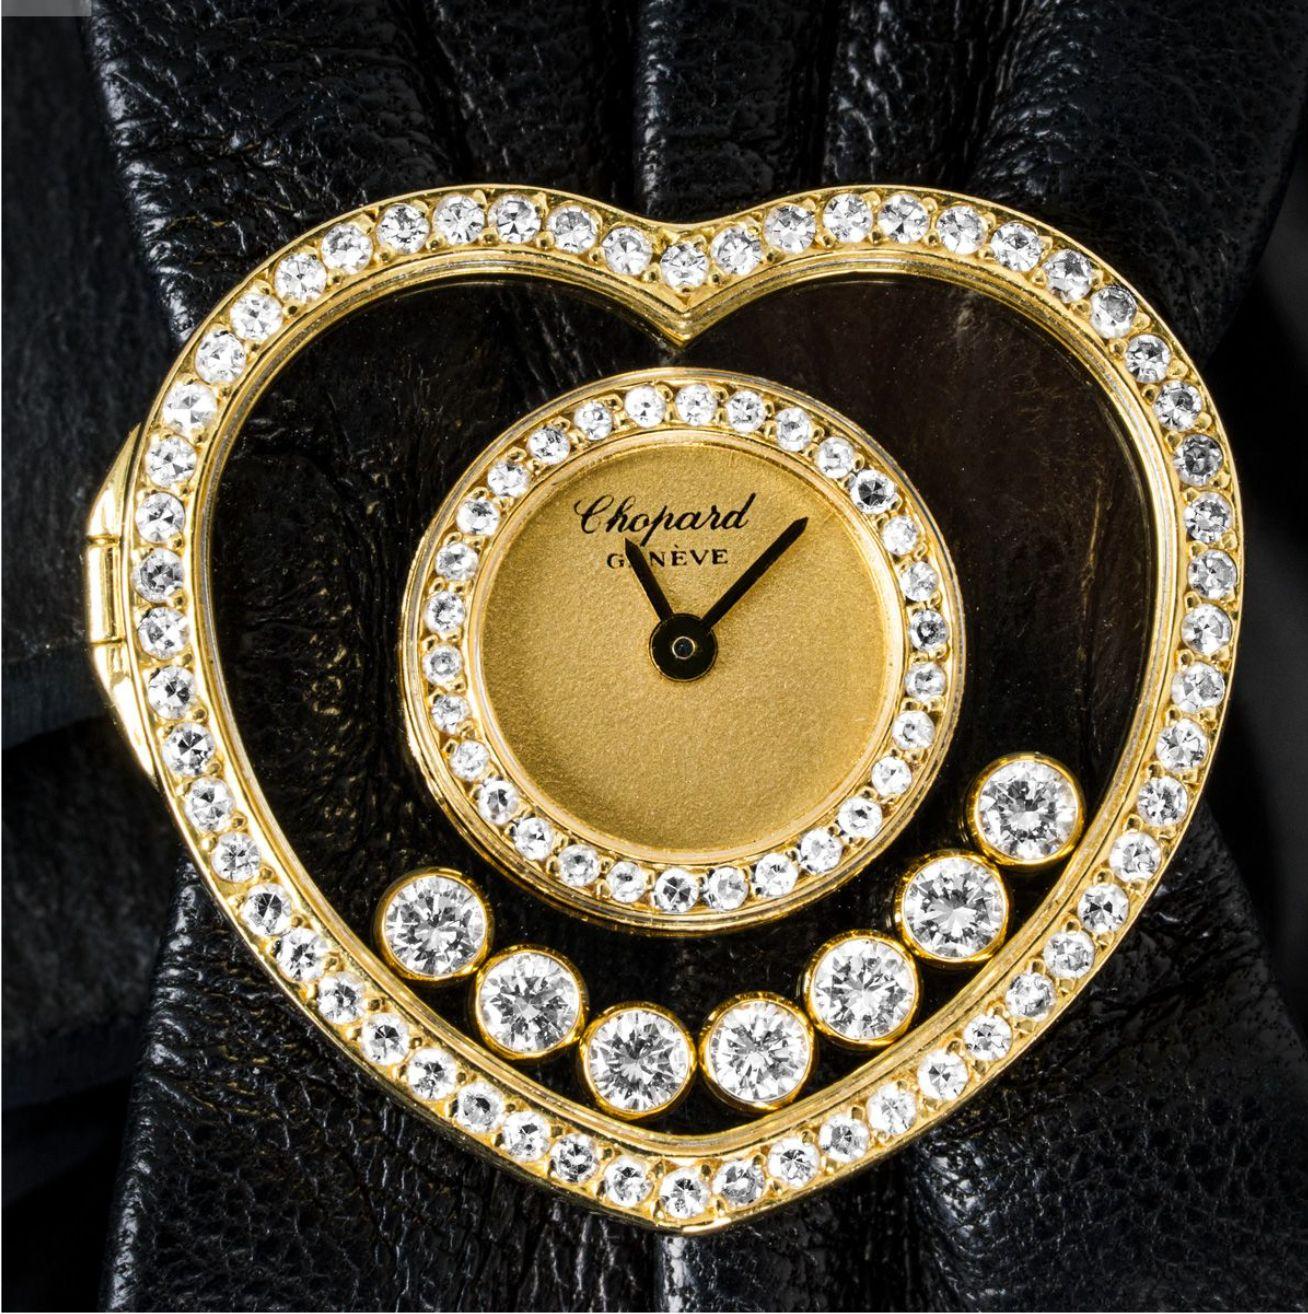 A ladies Happy Diamonds wristwatch crafted in yellow gold by Chopard. Featuring a champagne dial with a distinctive yellow gold bezel shaped like a heart. The watch also features 7 floating diamonds and a total of 86 round brilliant cut diamonds.